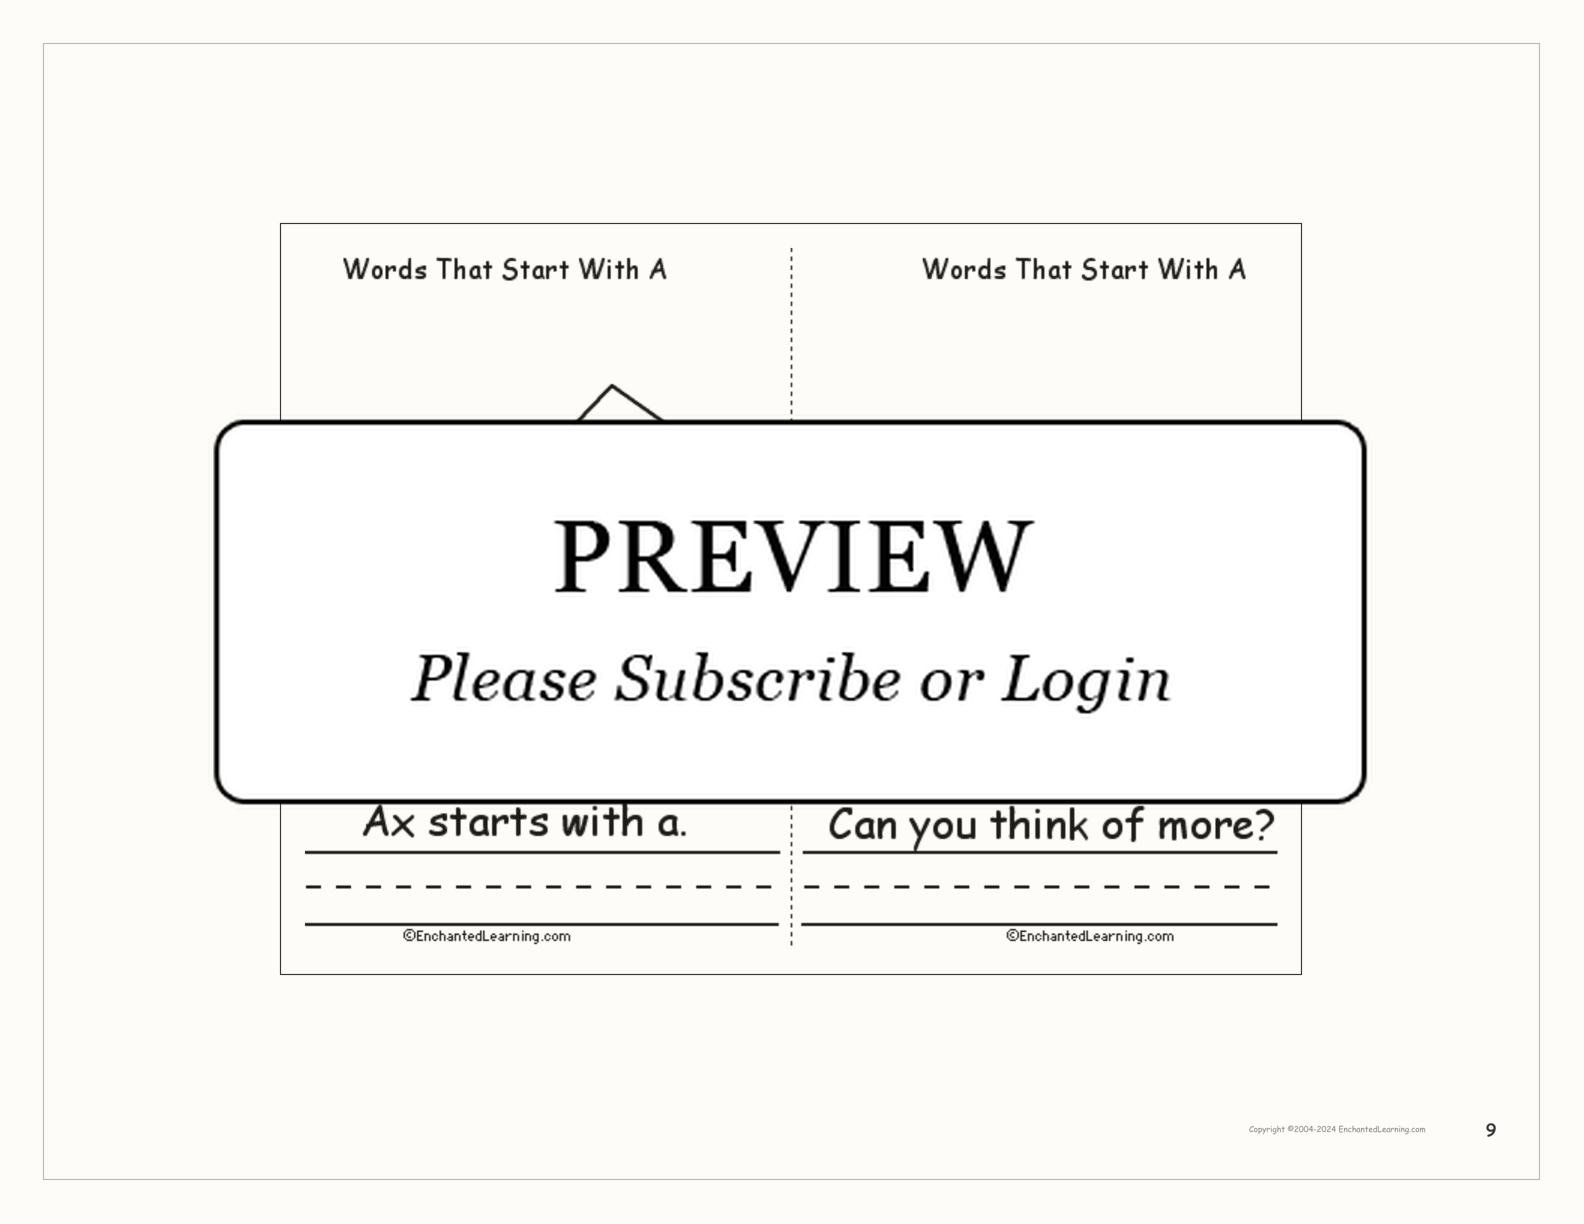 Words That Start With A interactive printout page 9